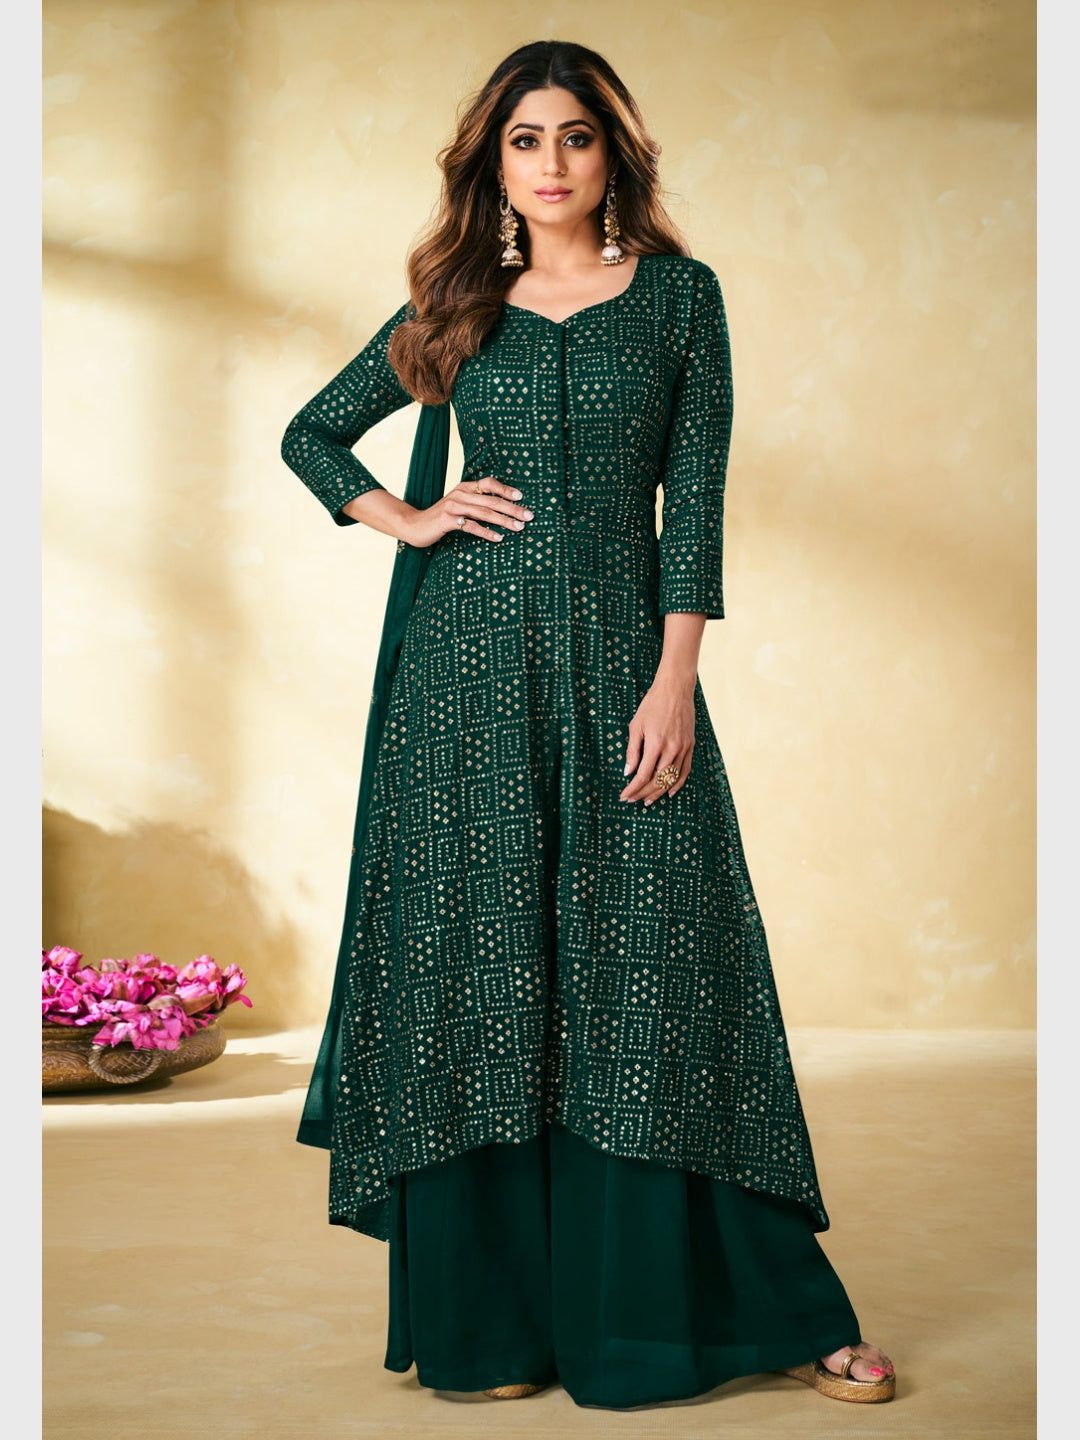 Premium Photo | Indian Beauty in Emerald Green Gown for Fashion Commercial